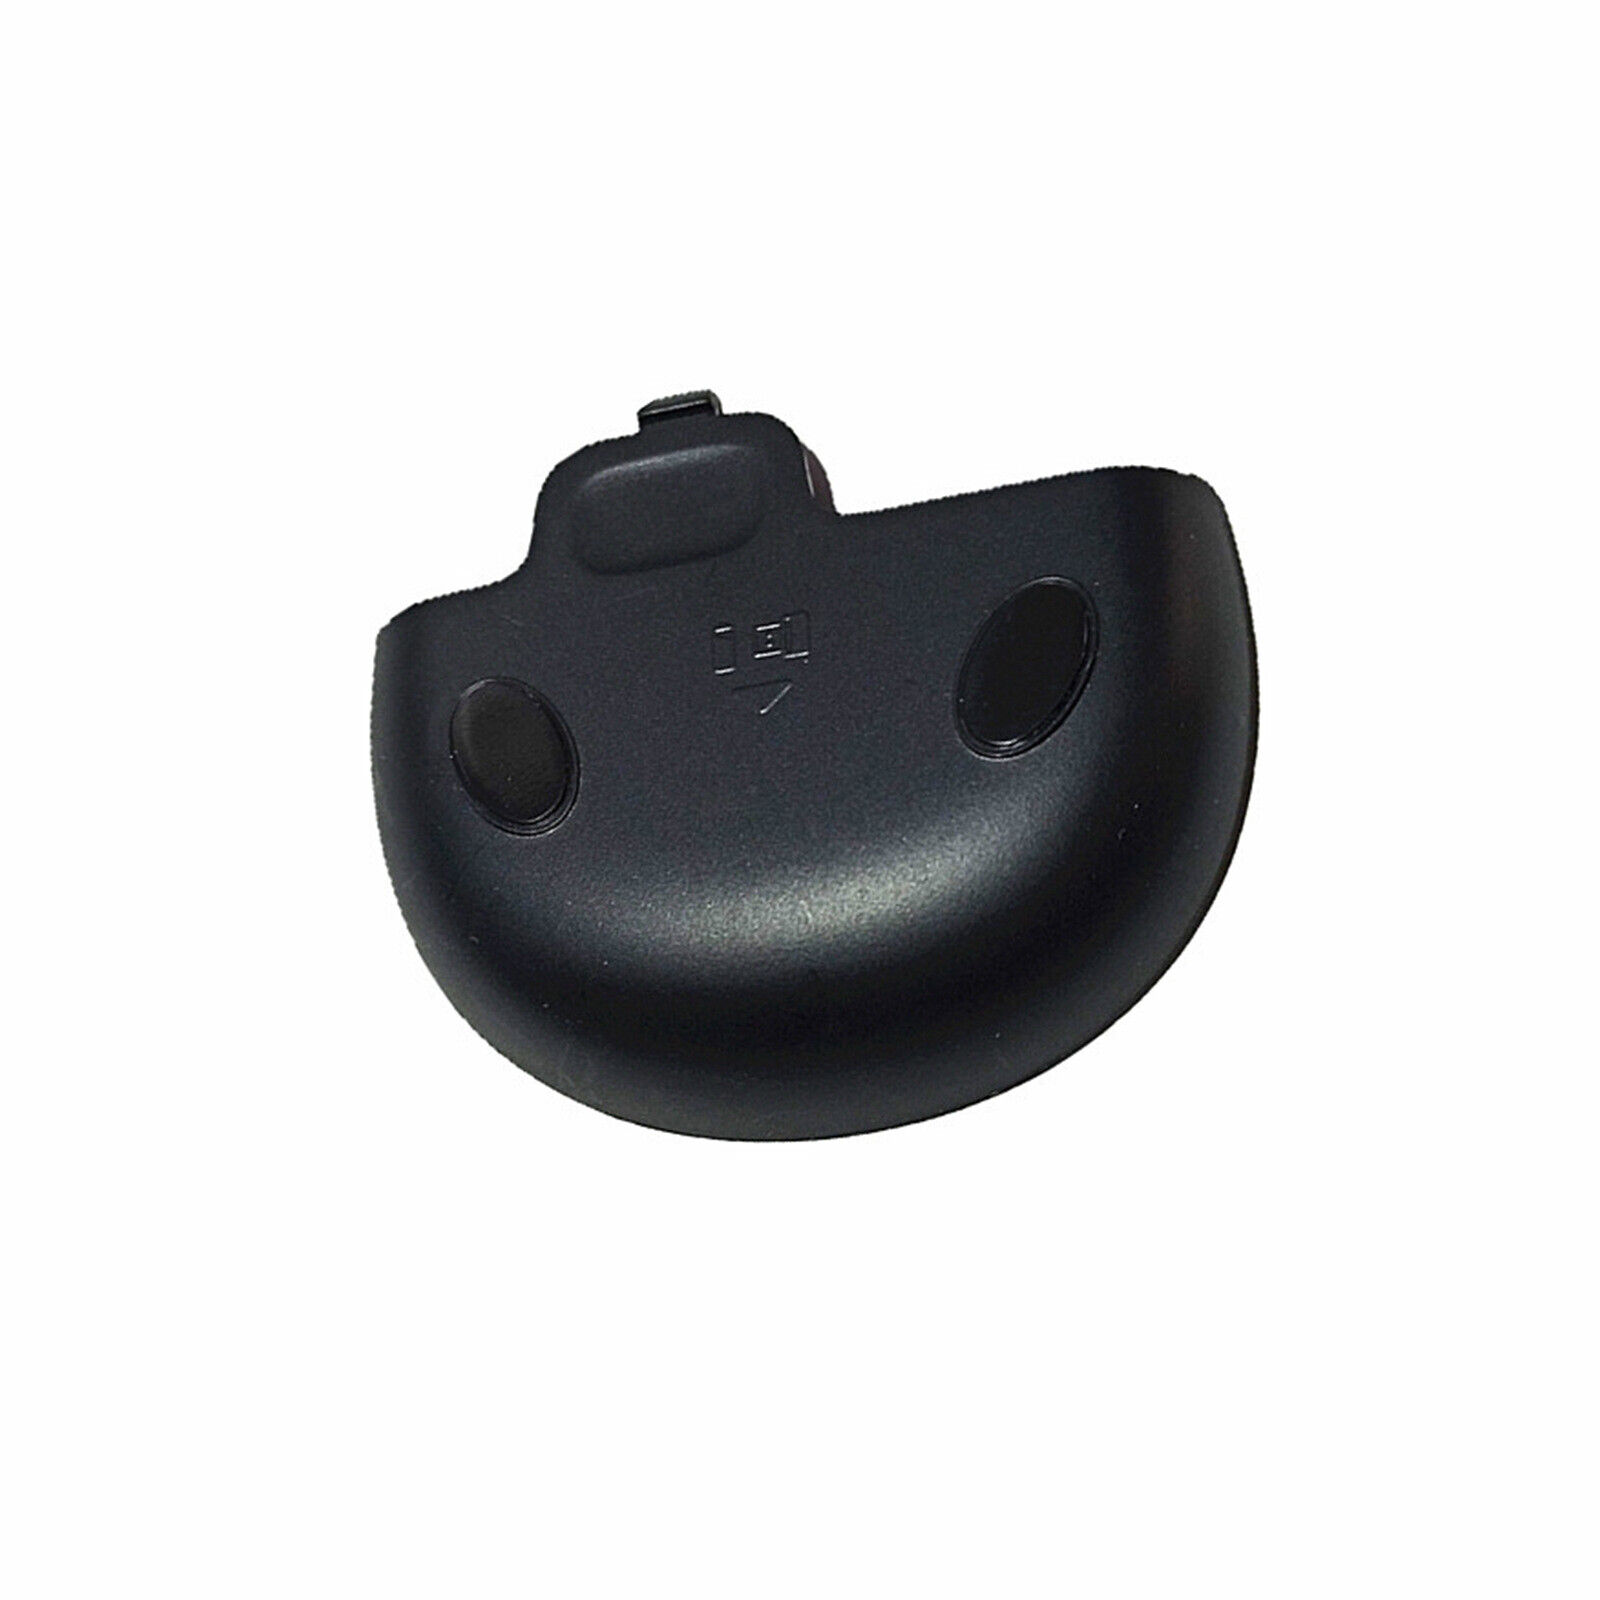 Mouse Battery Cover Protective Cap Door For Logitech M310 M310T Wireless Mouse